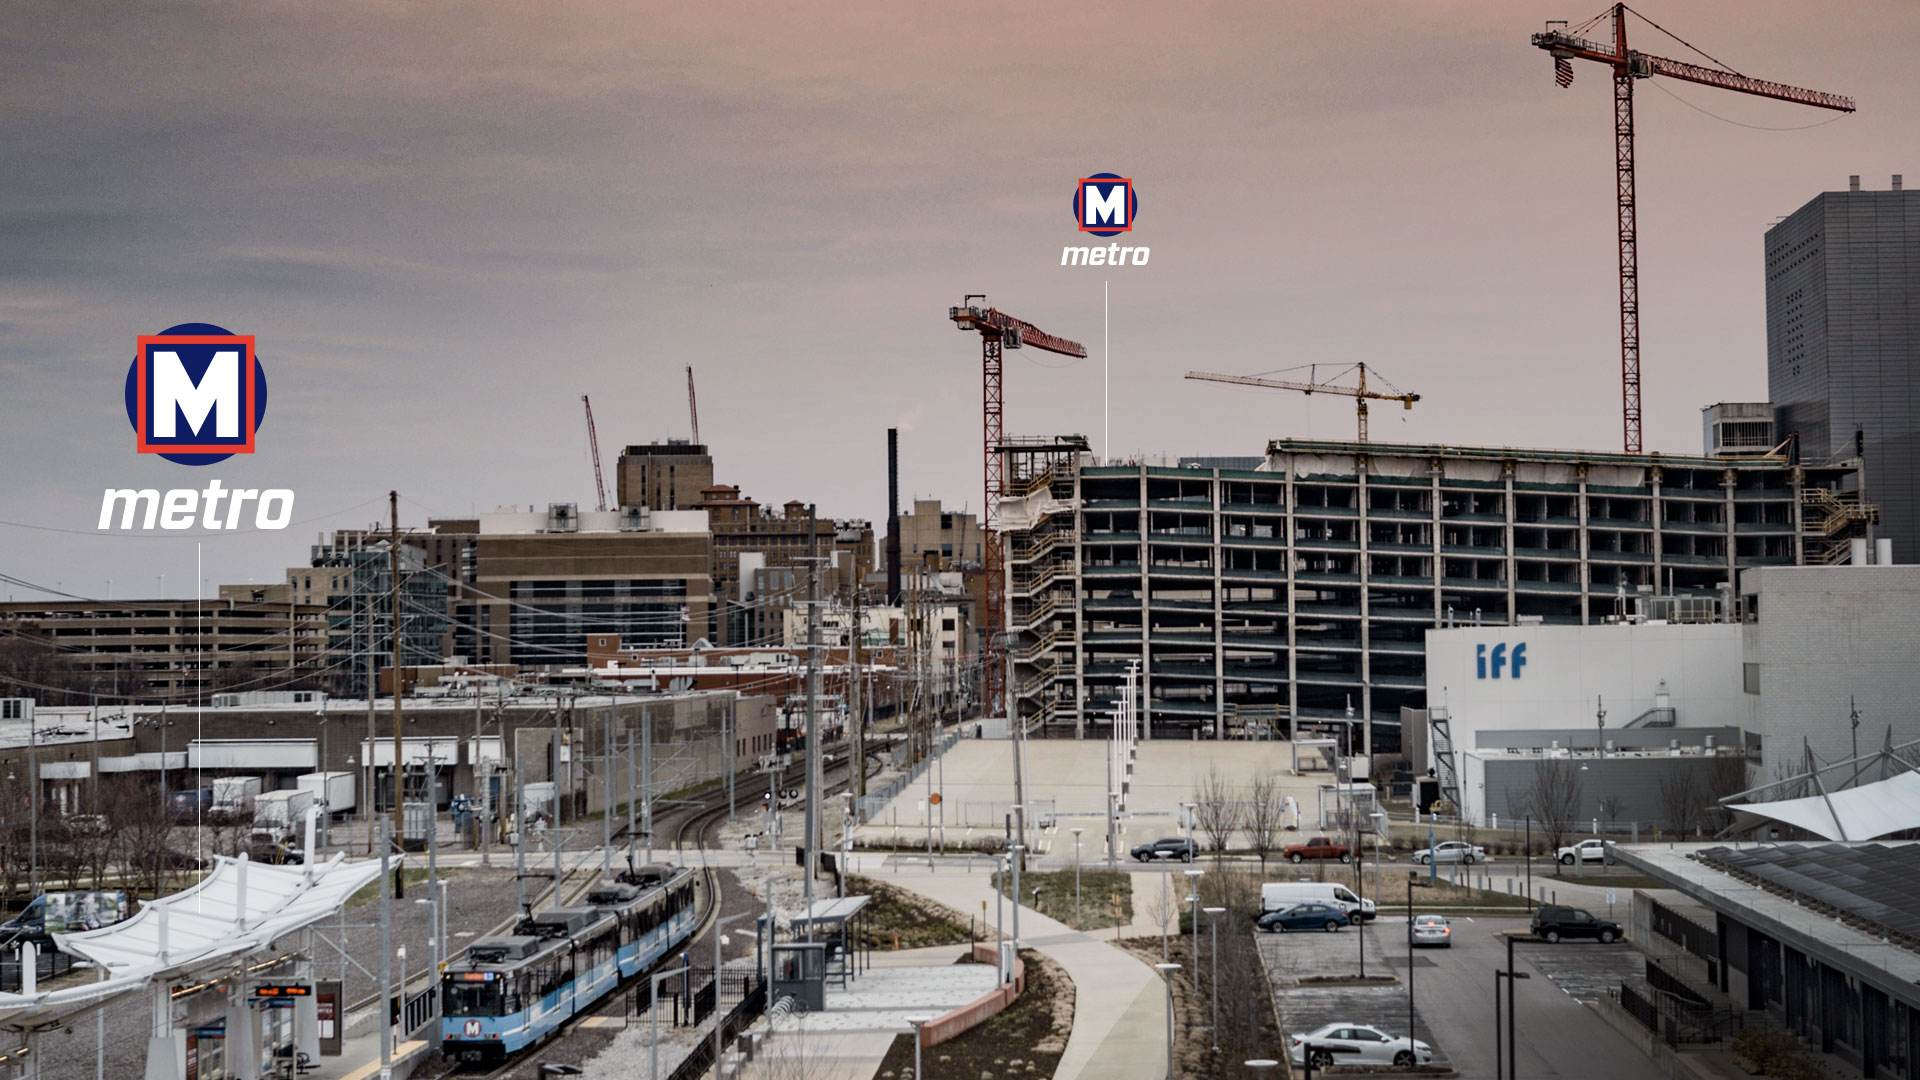 A photo of the Cortex area with a Metro station in the foreground and construction in the distance. Two Metro logos show the locations of each station.